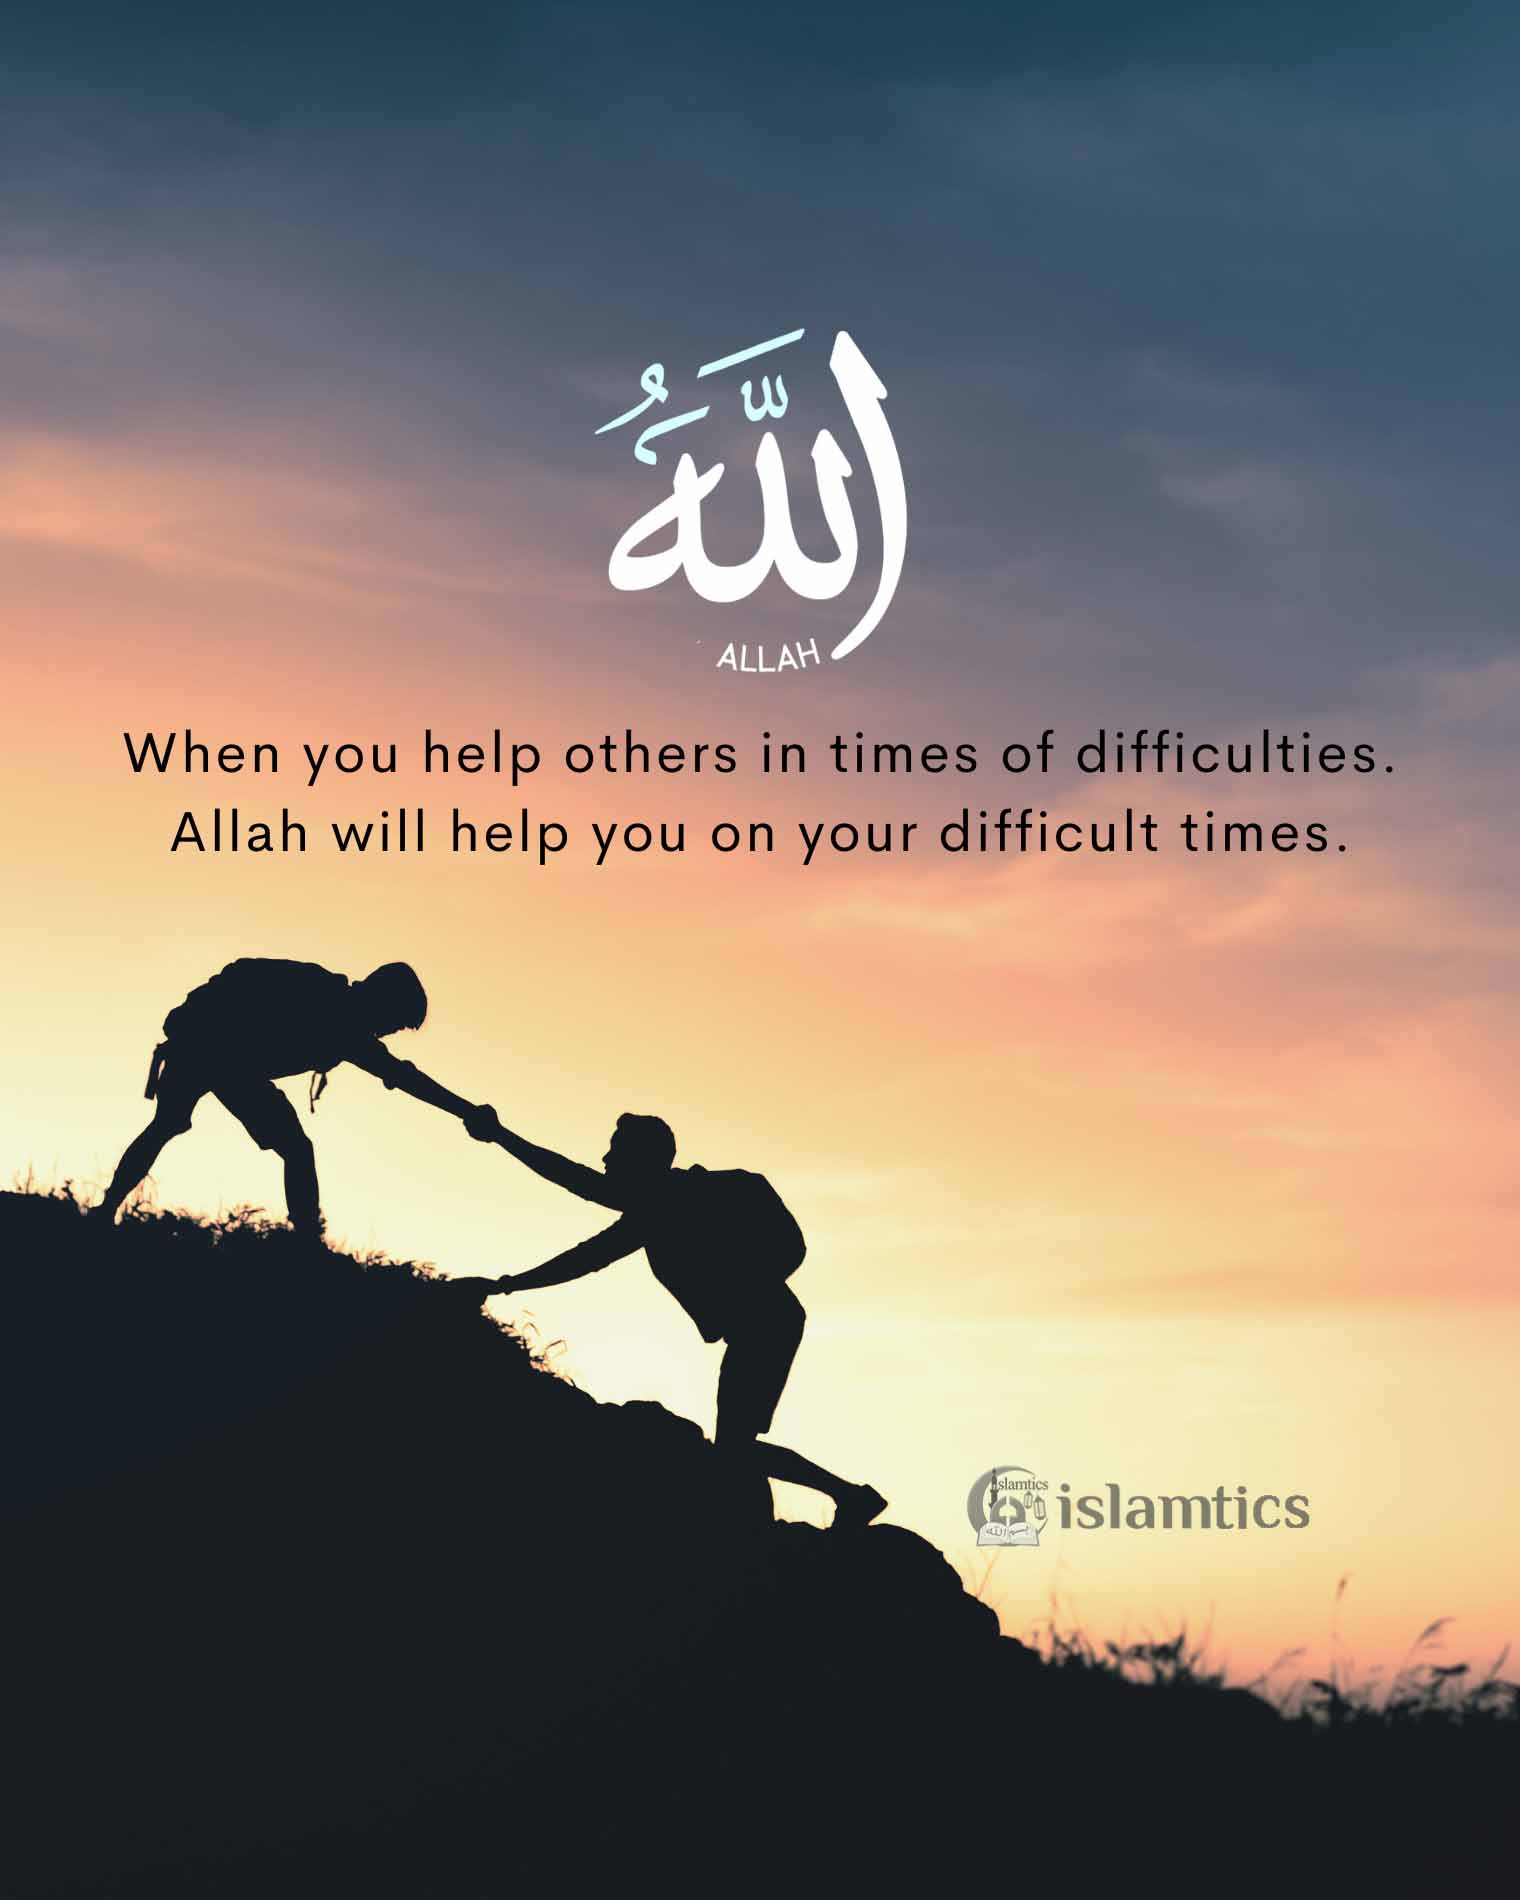  Allah will help you in your difficult times.